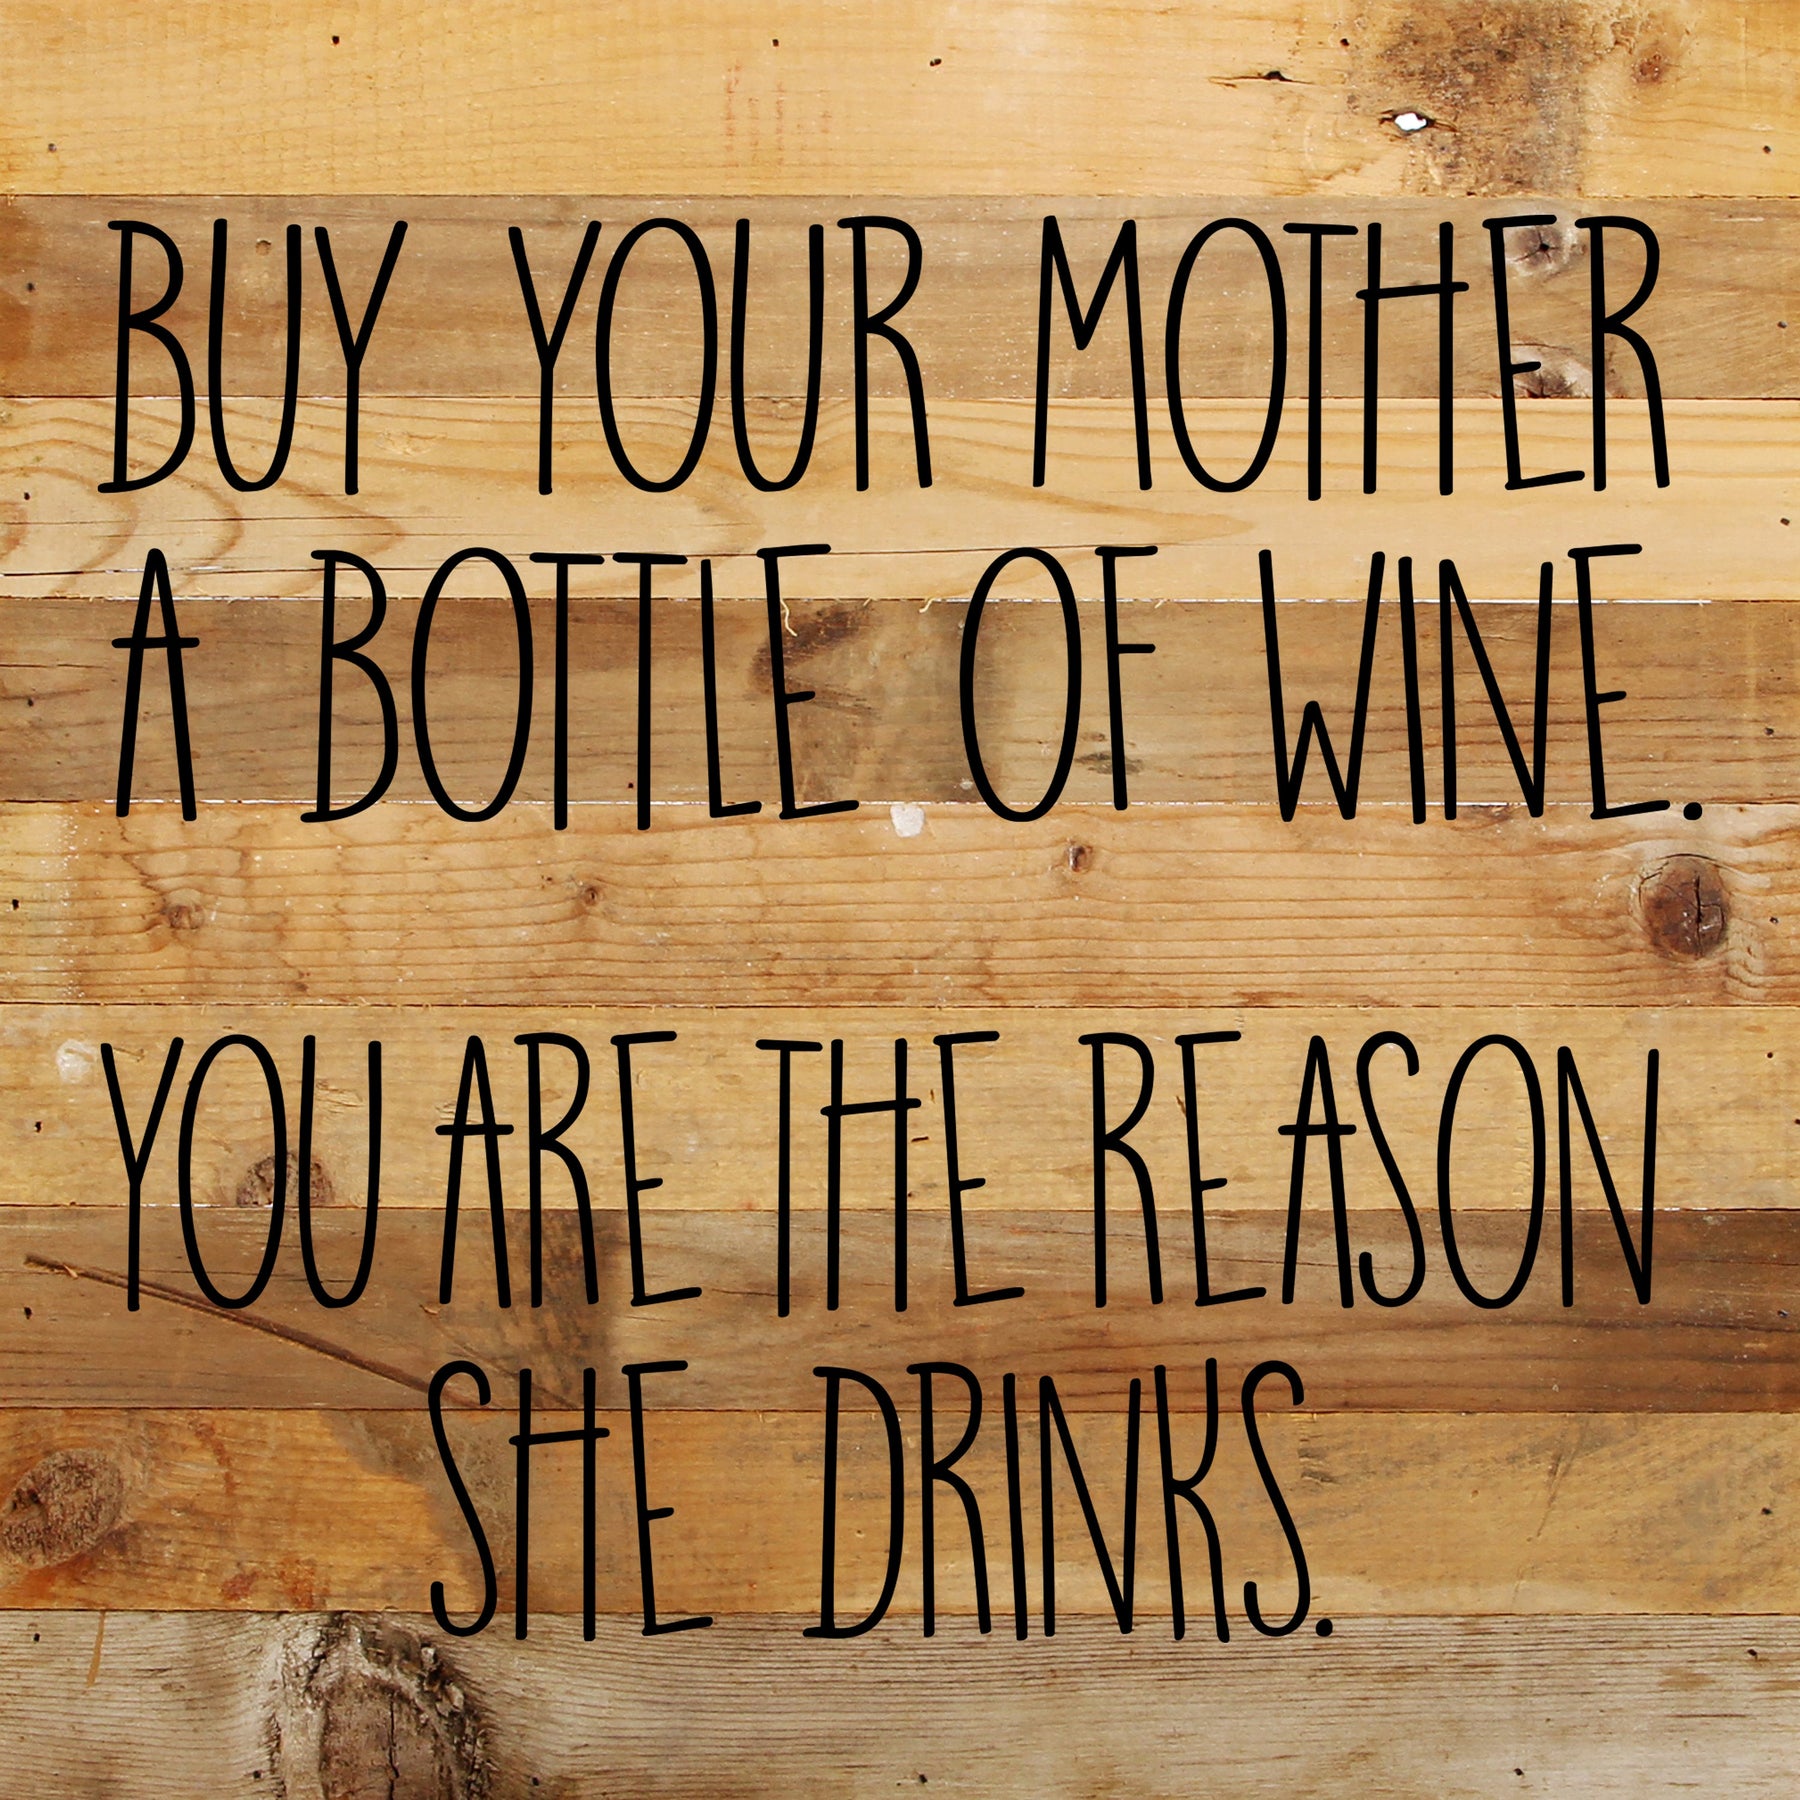 Buy you mother a bottle of wine, you are the reason she drinks. / 10"x10" Reclaimed Wood Sign